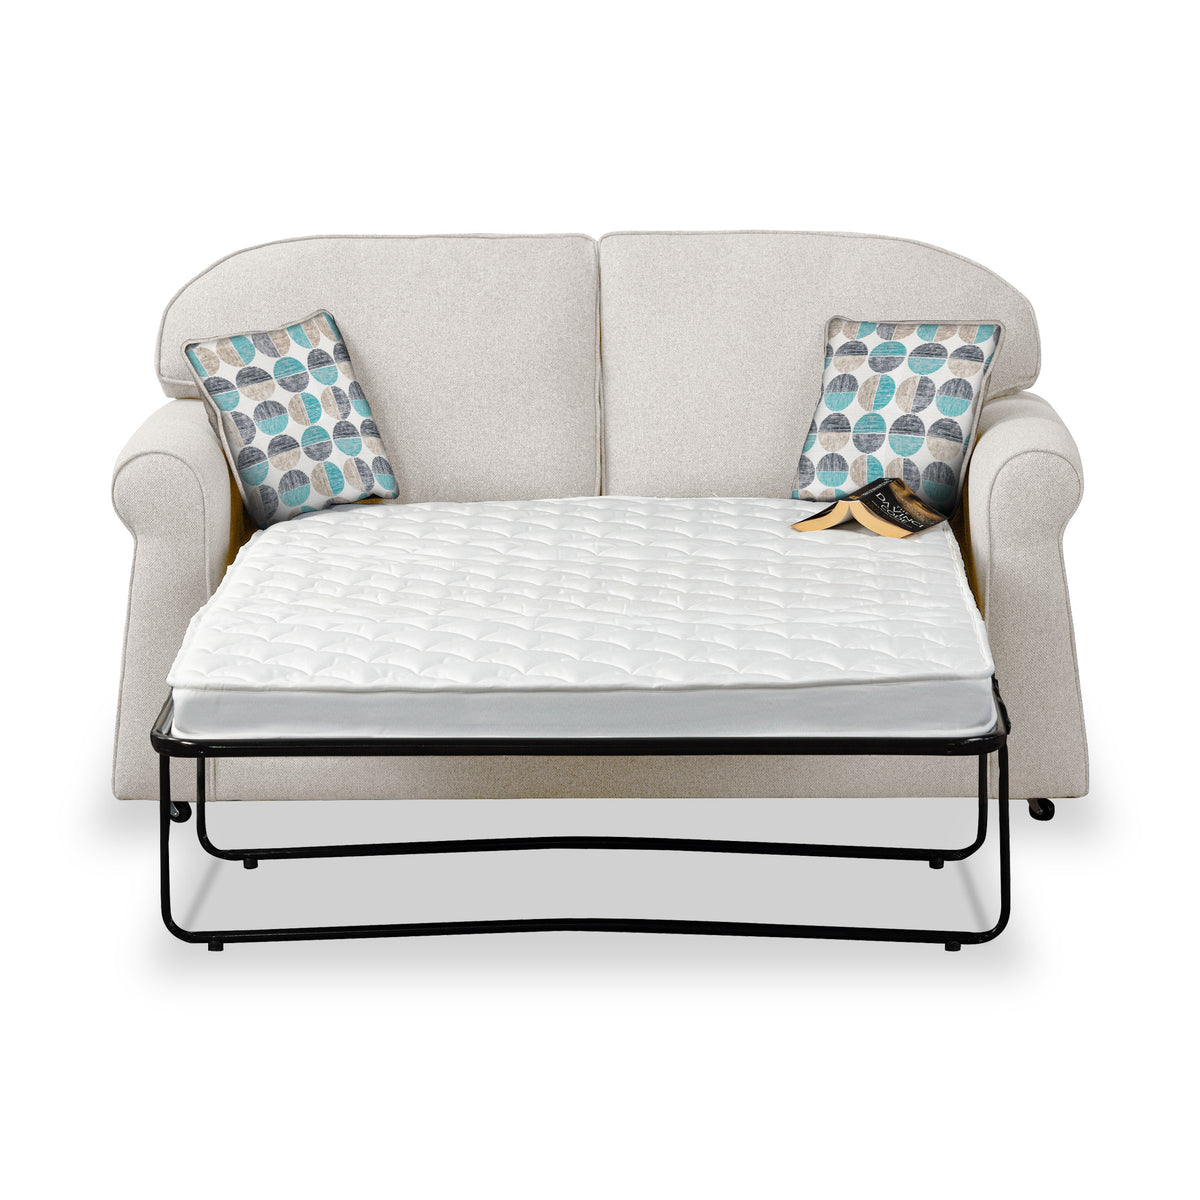 Giselle Oatmeal Soft Weave 2 Seater Sofabed with Duck Egg Scatter Cushions from Roseland Furniture